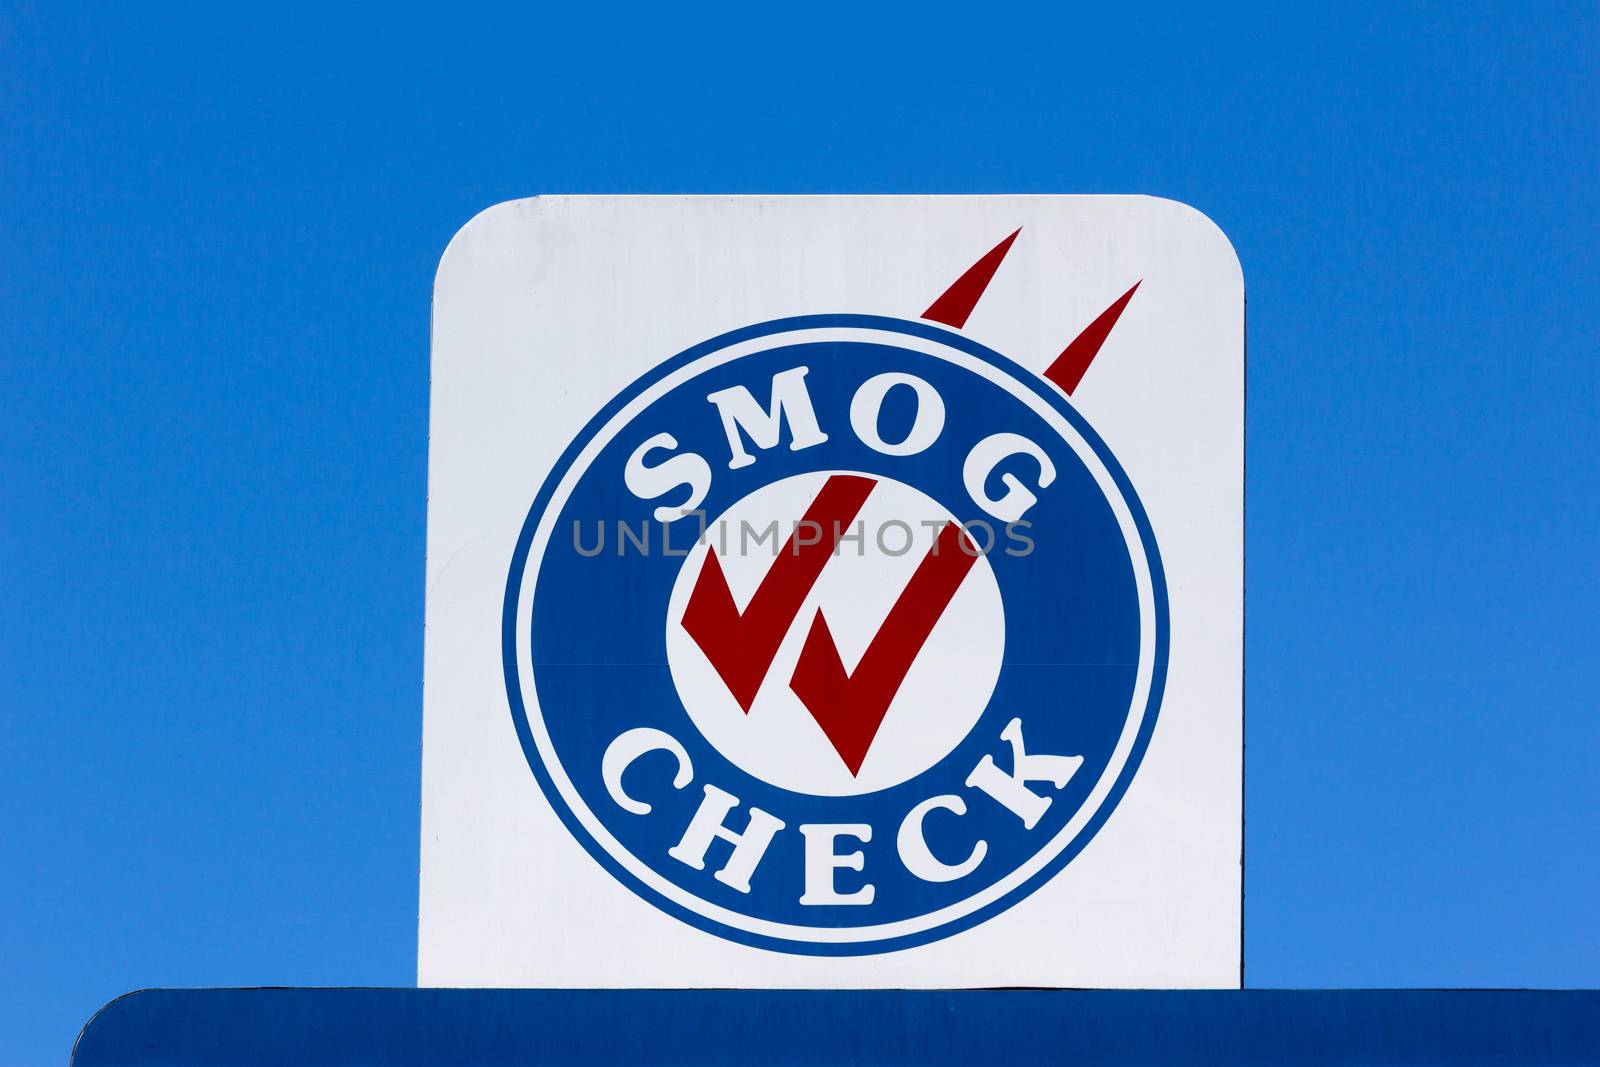 Smog Check Sign by wolterk